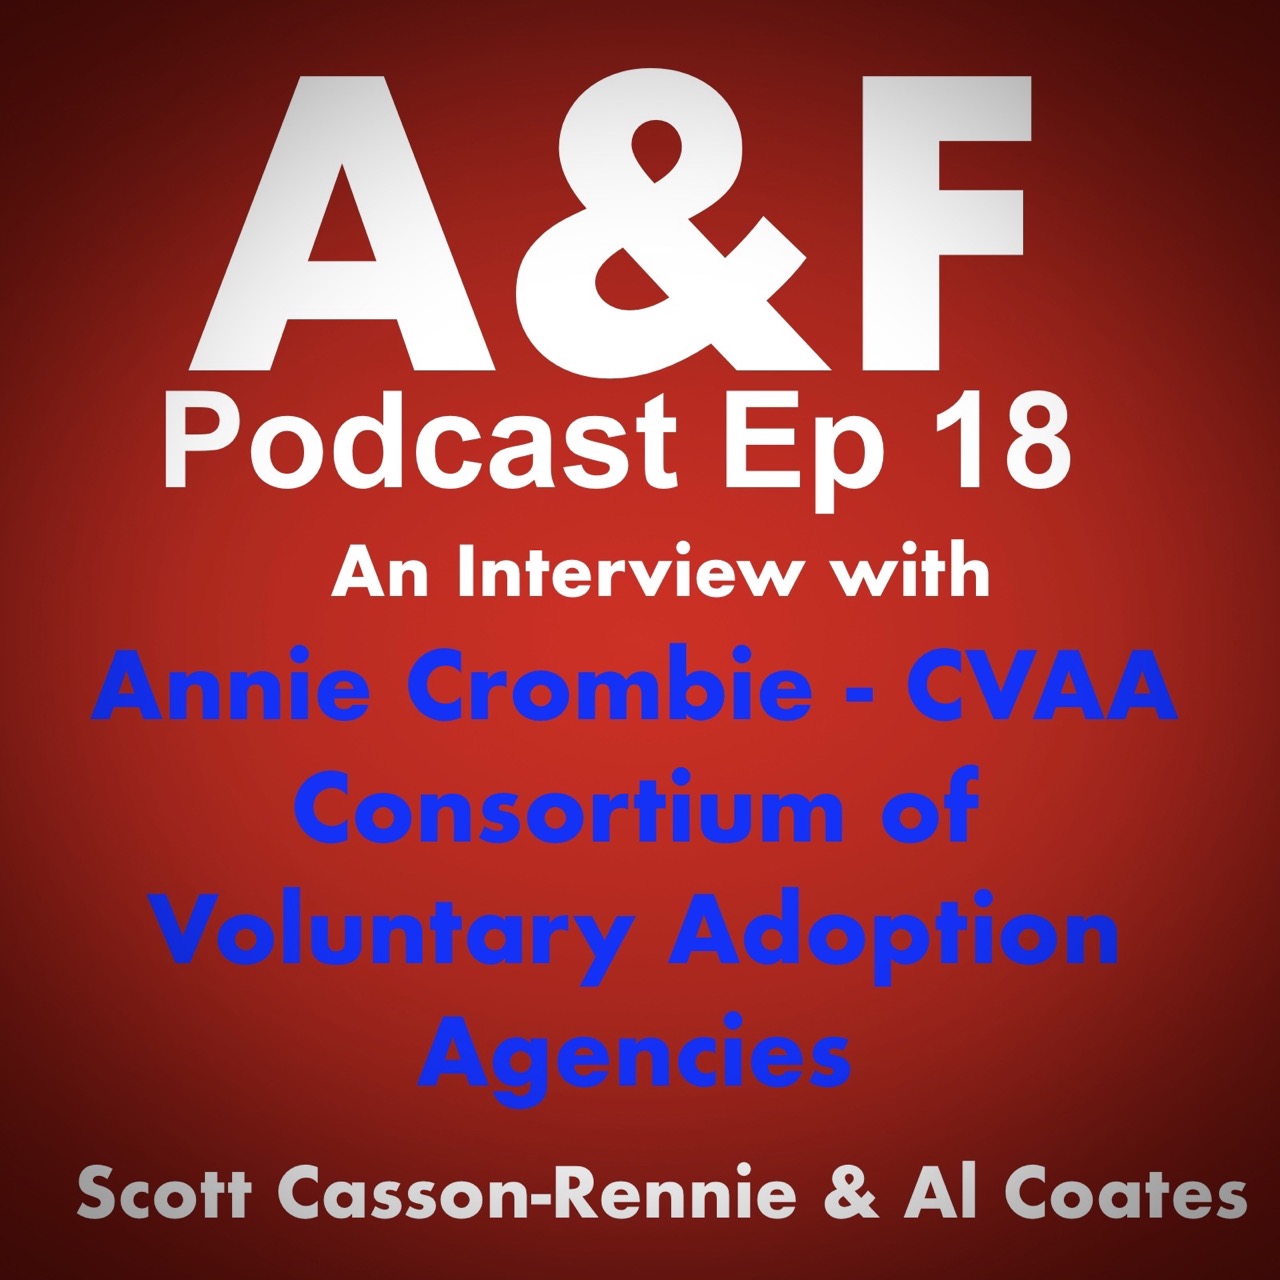 Episode 18 - An interview with Annie Crombie of the Consortium of Voluntary Adoption Agencies